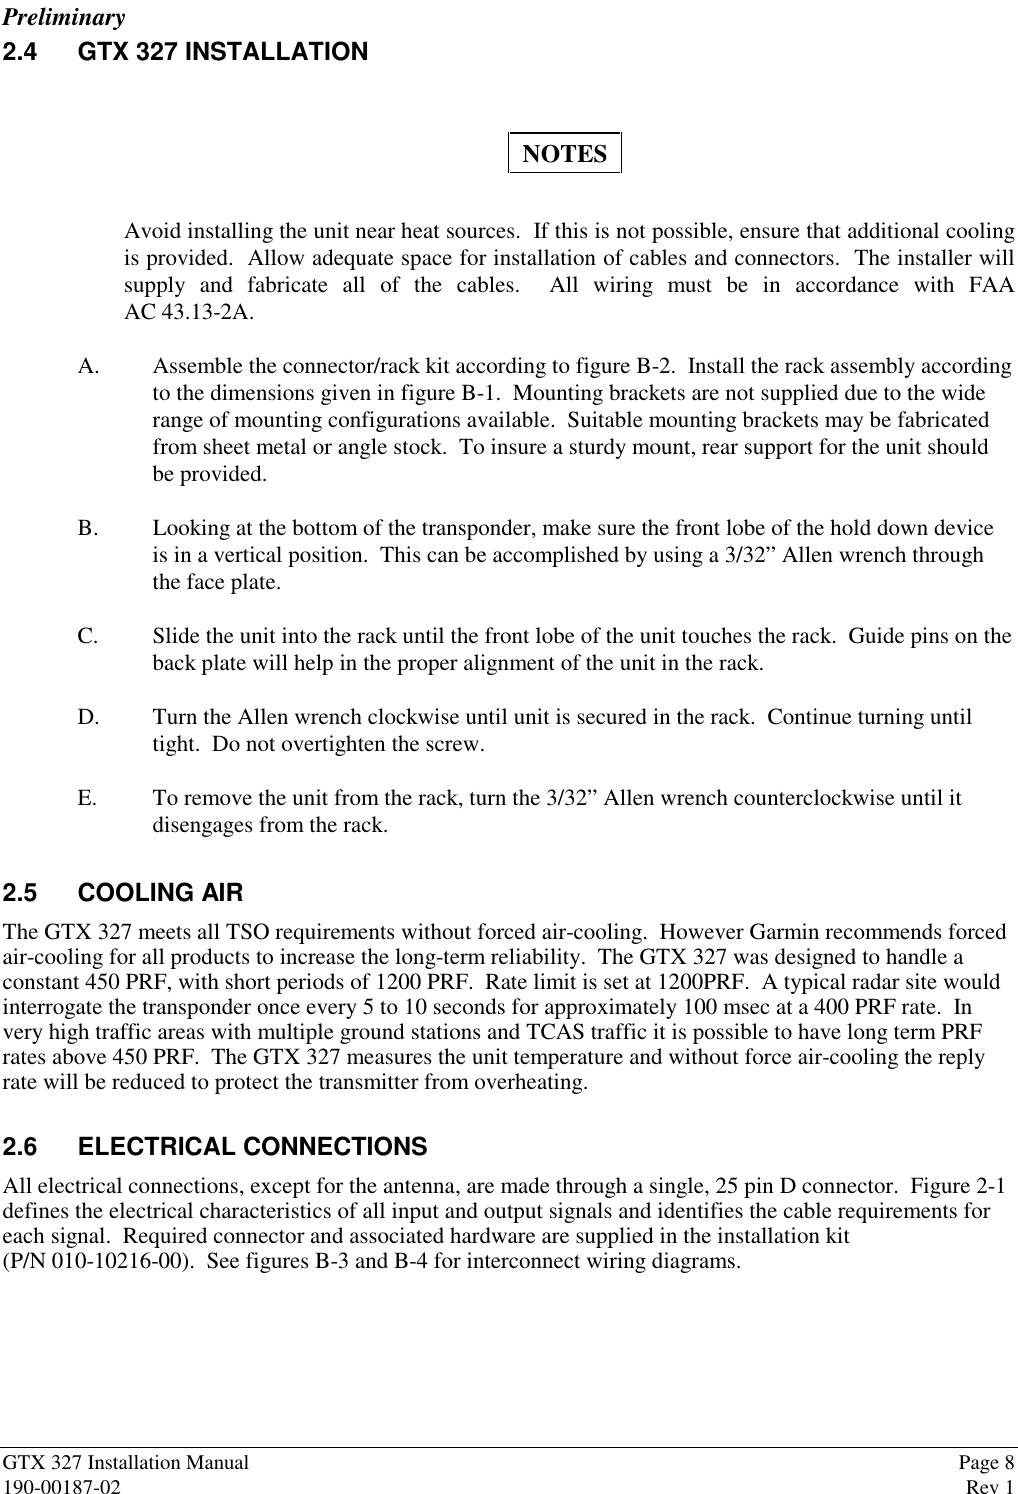 PreliminaryGTX 327 Installation Manual Page 8190-00187-02 Rev 12.4 GTX 327 INSTALLATIONNOTESAvoid installing the unit near heat sources.  If this is not possible, ensure that additional coolingis provided.  Allow adequate space for installation of cables and connectors.  The installer willsupply and fabricate all of the cables.  All wiring must be in accordance with FAAAC 43.13-2A.A. Assemble the connector/rack kit according to figure B-2.  Install the rack assembly accordingto the dimensions given in figure B-1.  Mounting brackets are not supplied due to the widerange of mounting configurations available.  Suitable mounting brackets may be fabricatedfrom sheet metal or angle stock.  To insure a sturdy mount, rear support for the unit shouldbe provided.B. Looking at the bottom of the transponder, make sure the front lobe of the hold down deviceis in a vertical position.  This can be accomplished by using a 3/32” Allen wrench throughthe face plate.C. Slide the unit into the rack until the front lobe of the unit touches the rack.  Guide pins on theback plate will help in the proper alignment of the unit in the rack.D. Turn the Allen wrench clockwise until unit is secured in the rack.  Continue turning untiltight.  Do not overtighten the screw.E. To remove the unit from the rack, turn the 3/32” Allen wrench counterclockwise until itdisengages from the rack.2.5 COOLING AIRThe GTX 327 meets all TSO requirements without forced air-cooling.  However Garmin recommends forcedair-cooling for all products to increase the long-term reliability.  The GTX 327 was designed to handle aconstant 450 PRF, with short periods of 1200 PRF.  Rate limit is set at 1200PRF.  A typical radar site wouldinterrogate the transponder once every 5 to 10 seconds for approximately 100 msec at a 400 PRF rate.  Invery high traffic areas with multiple ground stations and TCAS traffic it is possible to have long term PRFrates above 450 PRF.  The GTX 327 measures the unit temperature and without force air-cooling the replyrate will be reduced to protect the transmitter from overheating.2.6 ELECTRICAL CONNECTIONSAll electrical connections, except for the antenna, are made through a single, 25 pin D connector.  Figure 2-1defines the electrical characteristics of all input and output signals and identifies the cable requirements foreach signal.  Required connector and associated hardware are supplied in the installation kit(P/N 010-10216-00).  See figures B-3 and B-4 for interconnect wiring diagrams.